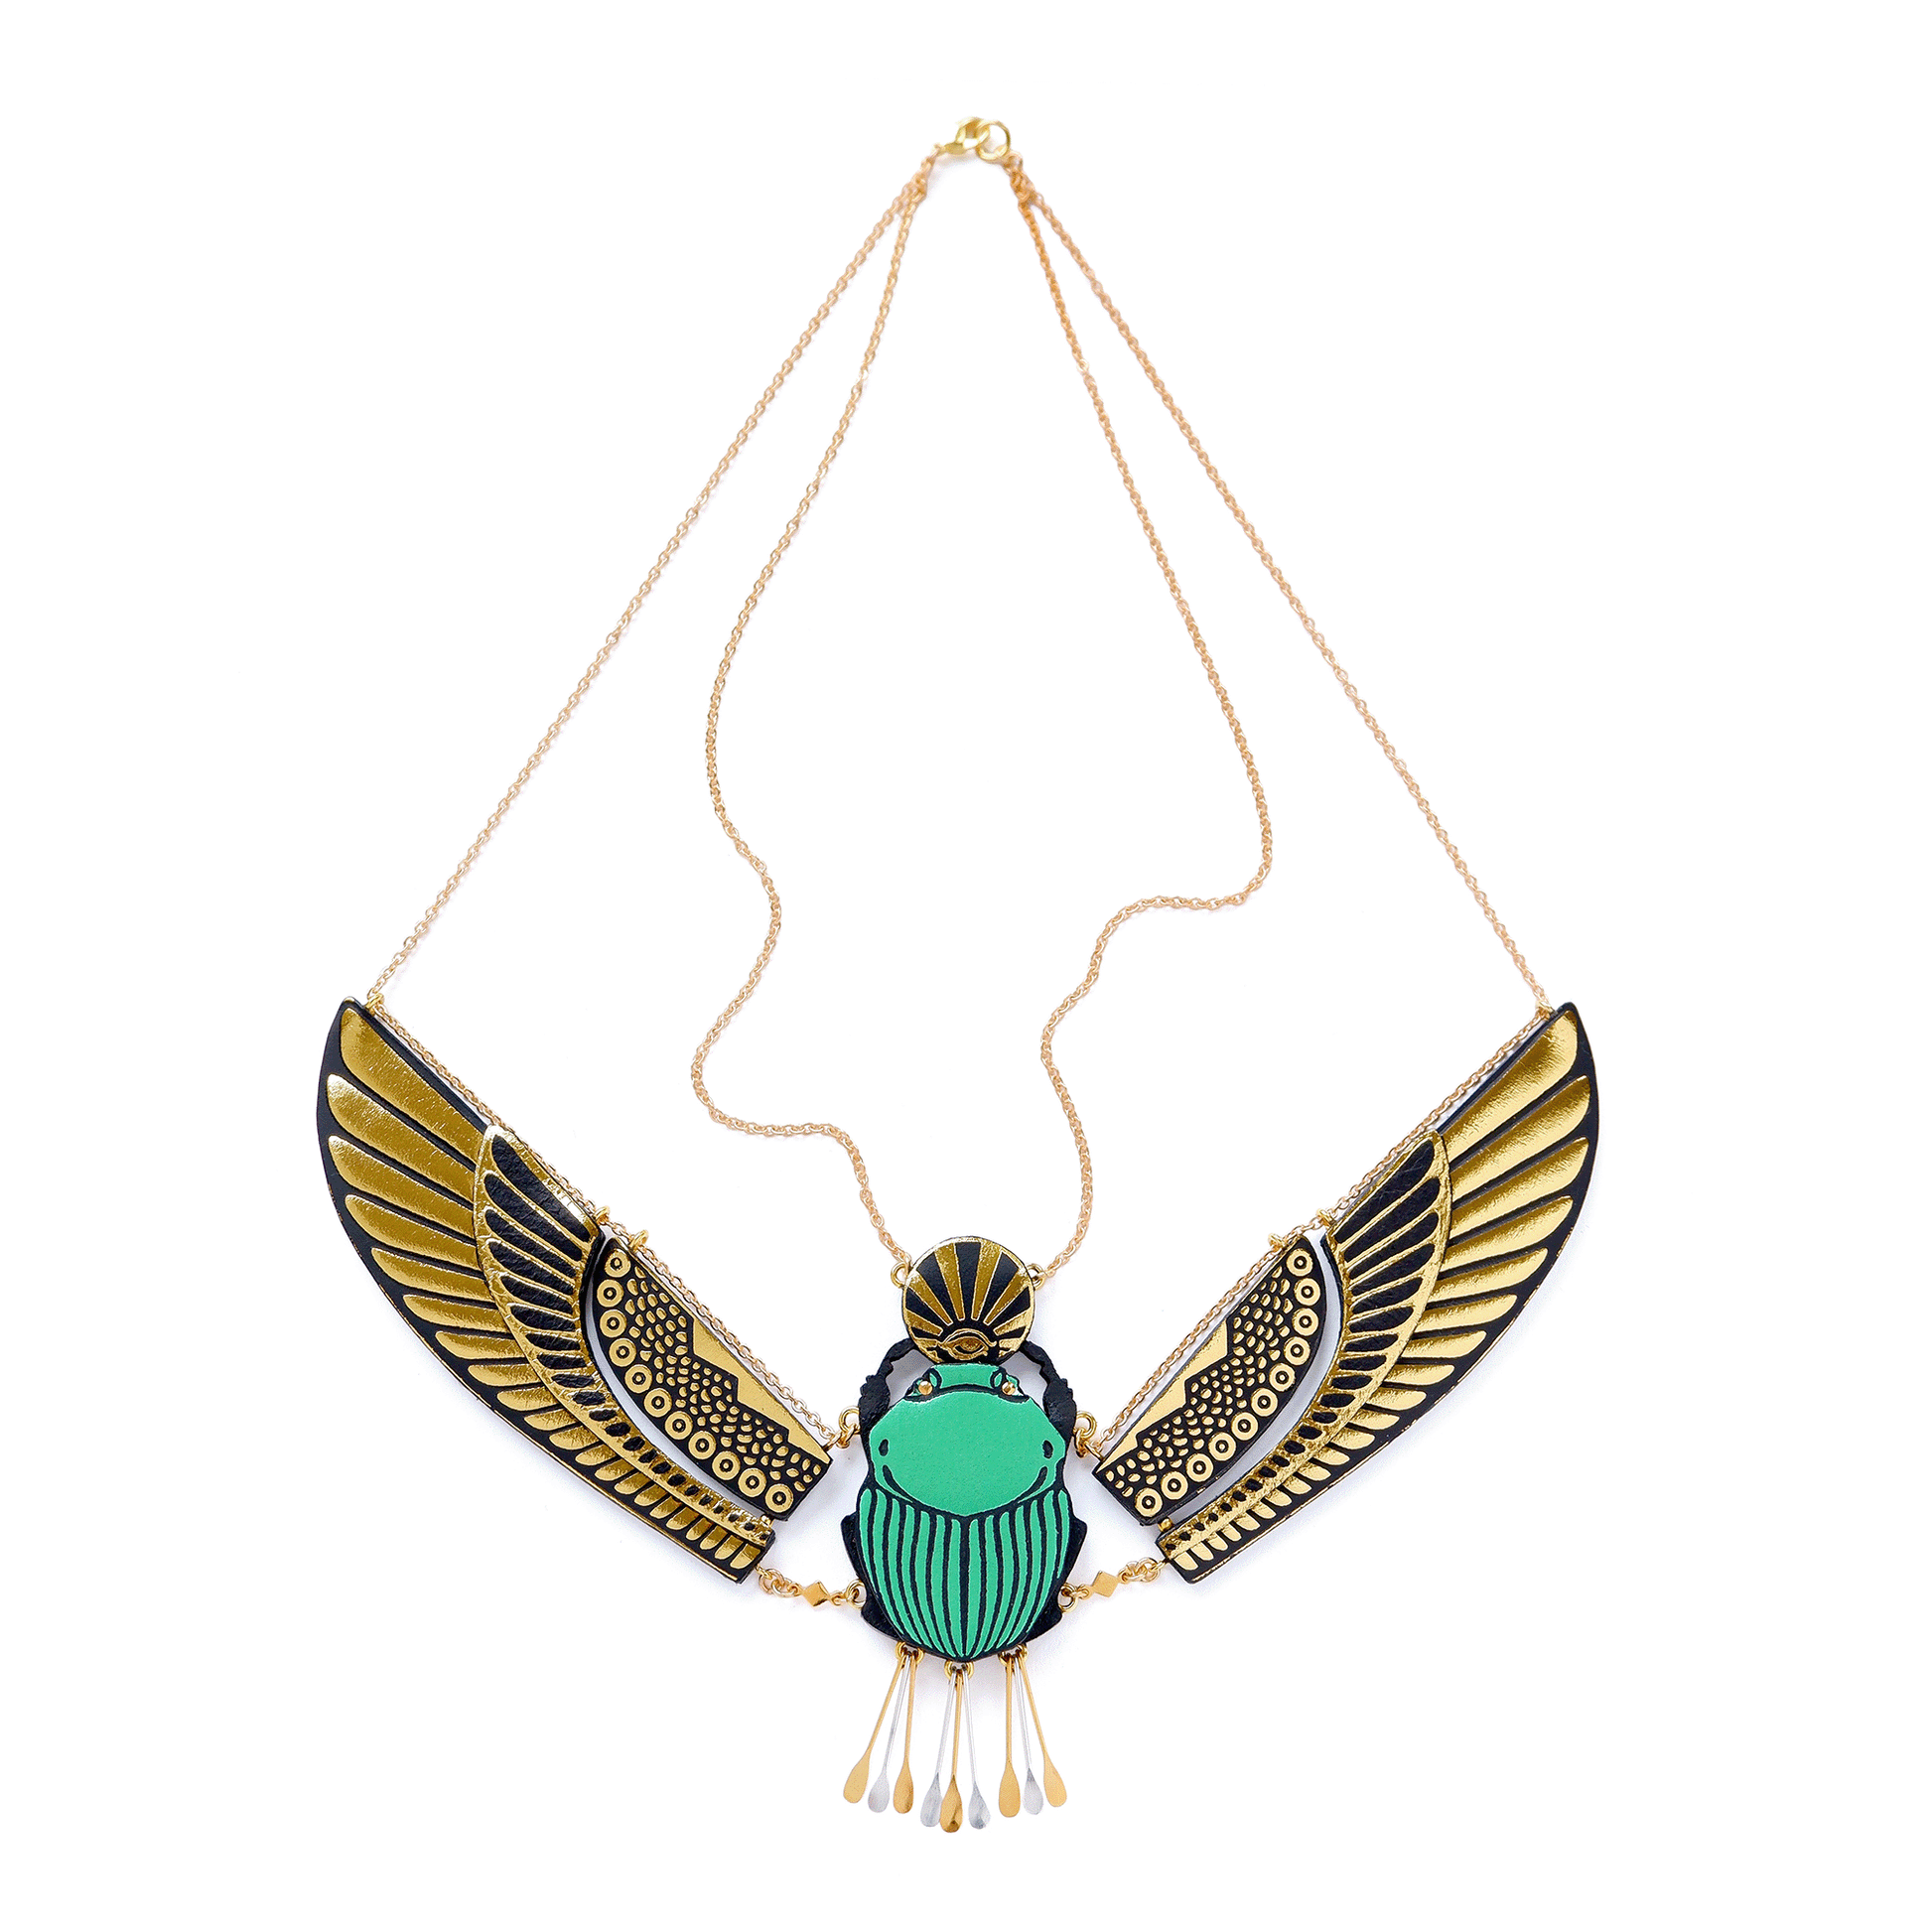 jade green sacred scarab necklace with gold wings. Made from printed leather, on fine gold chain